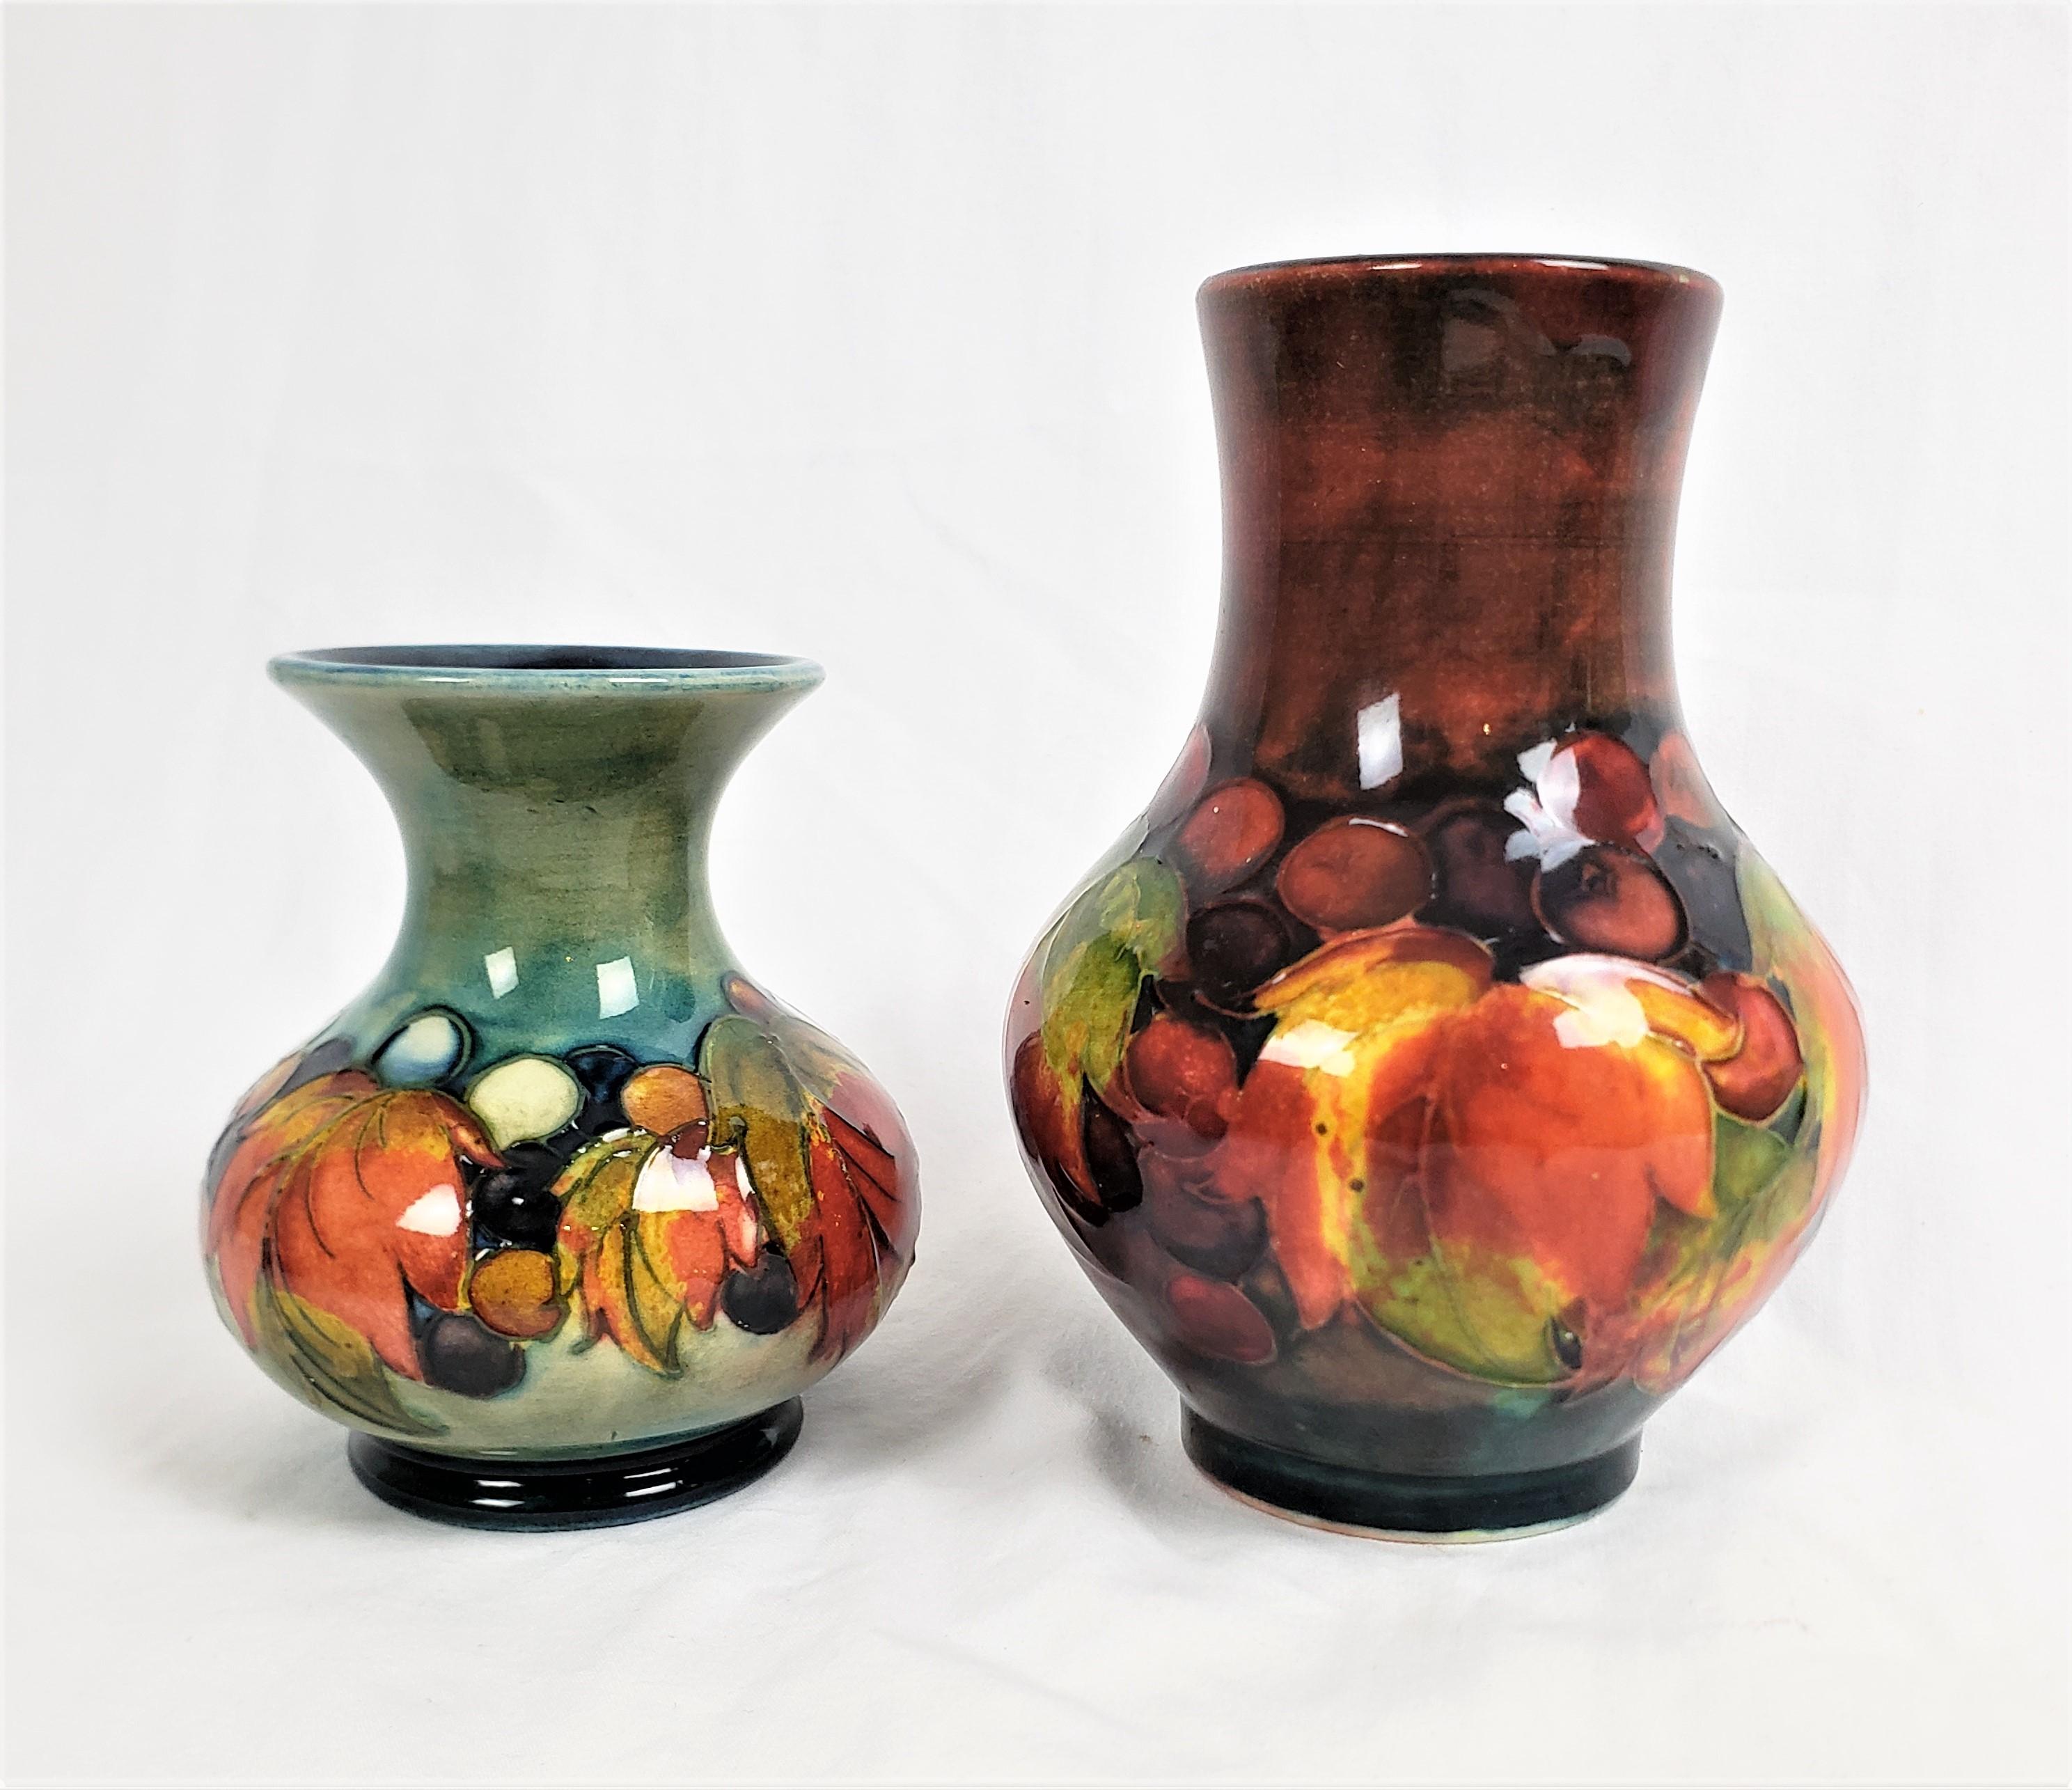 This pair of art pottery vases were done by the renowned Moorcroft Pottery Co. of England in approximately 1920, in their period Art Deco style. These vases are decorated with the Moorcroft 